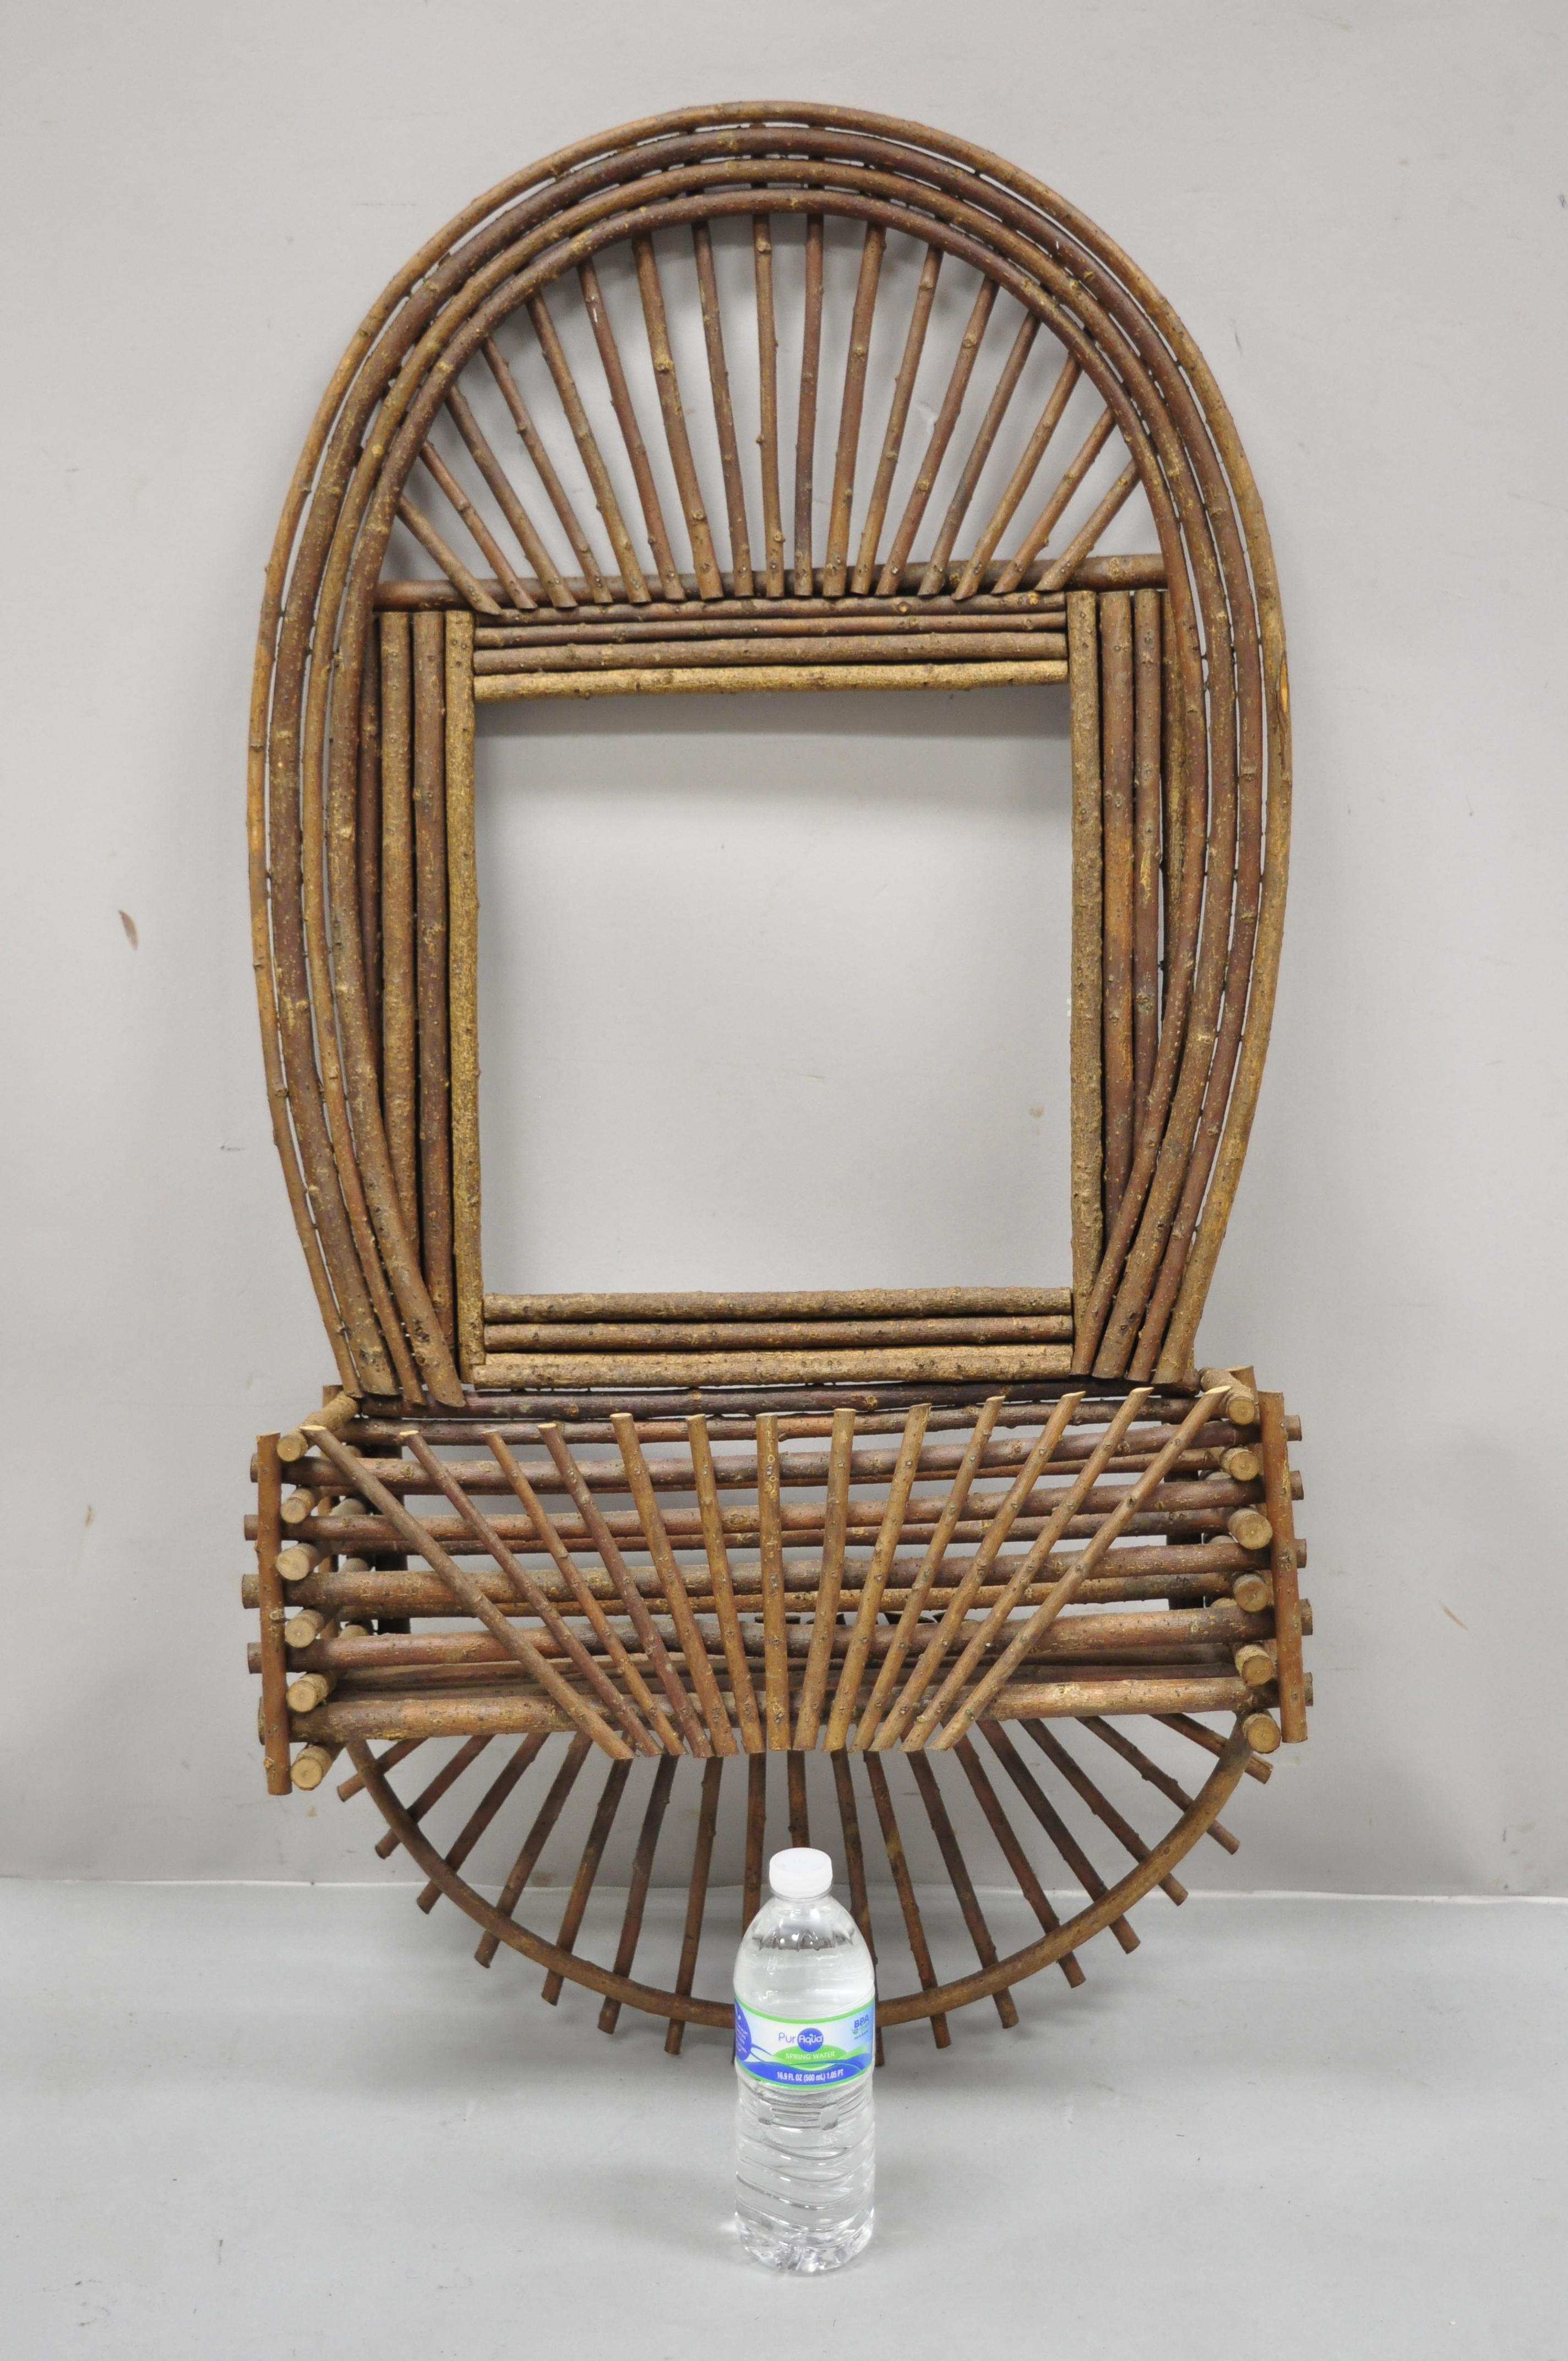 Adirondack Folk Art large twig branch wall shelf planter pocket mirror art frame. Item features handmade sunburst pinwheel frame, wall mounting with storage pocket and open frame, very nice vintage item, great style and form. Great to add a mirror